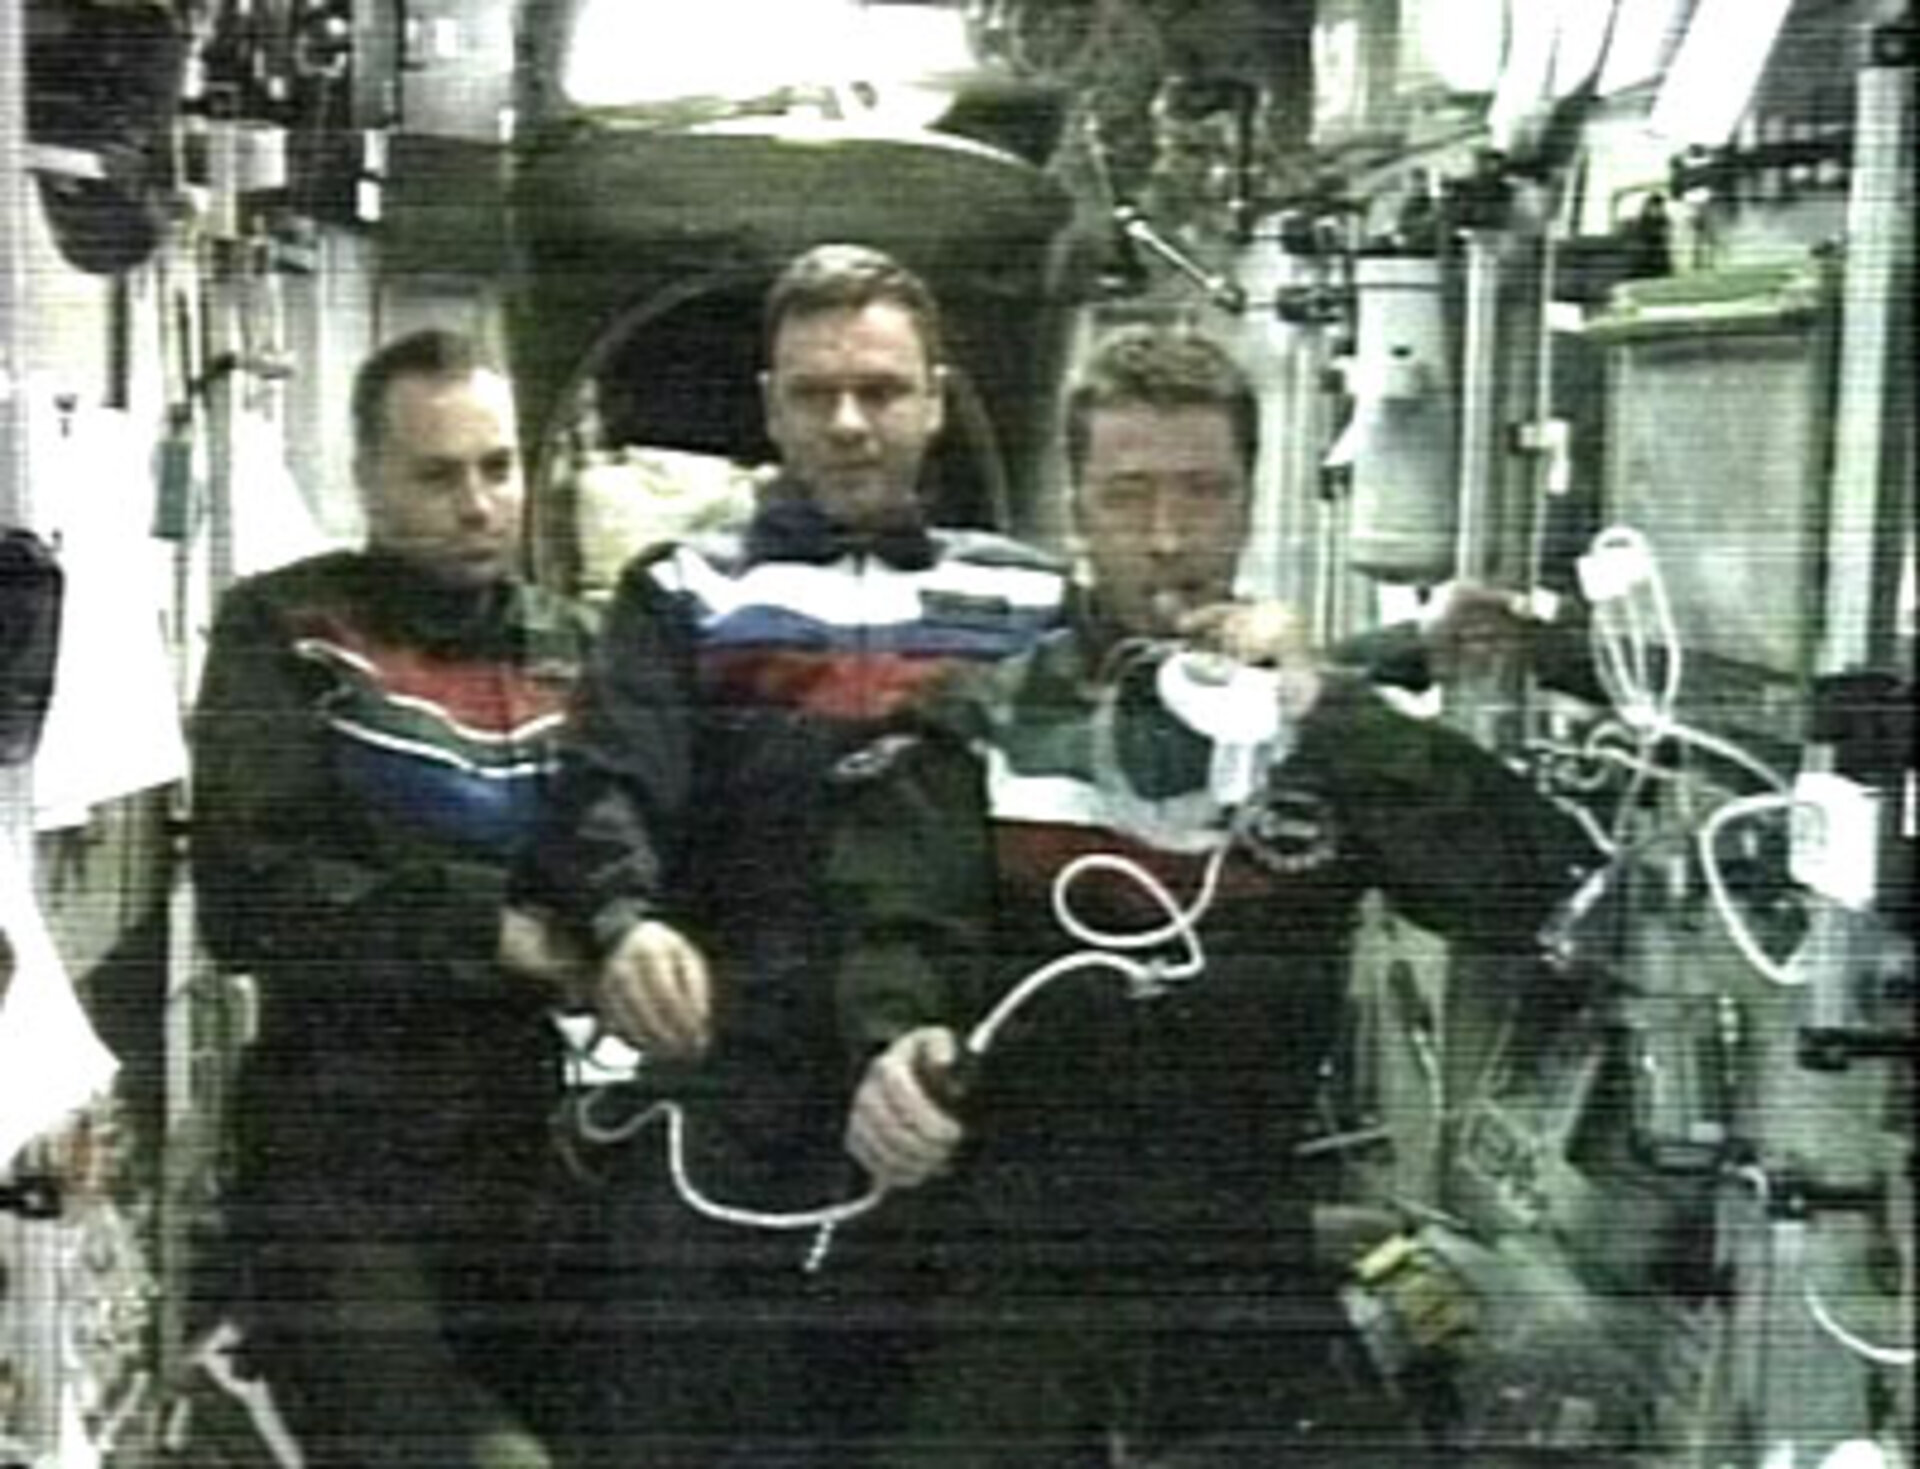 Marco Polo crew on board the ISS